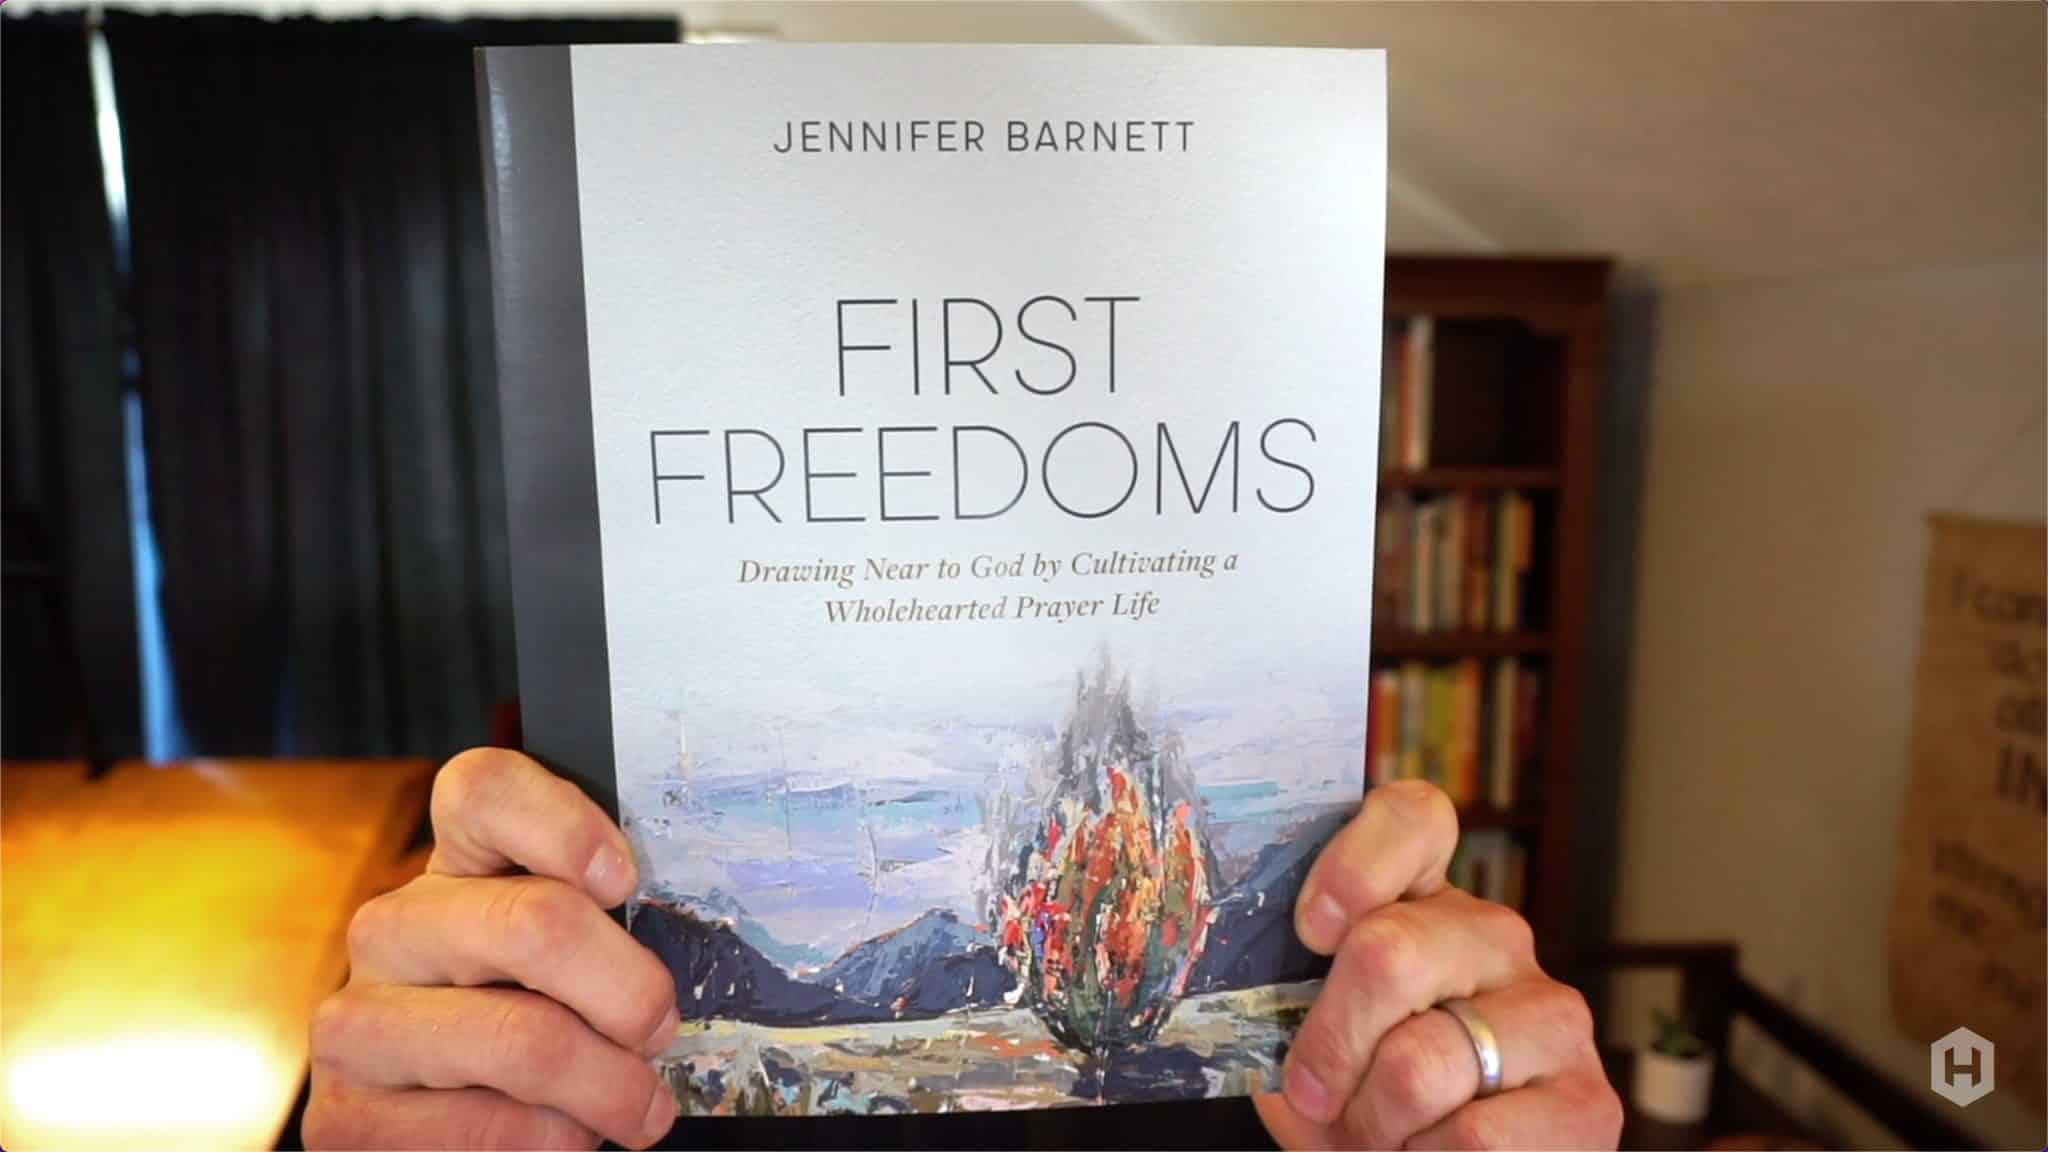 First Freedoms, a book on prayer